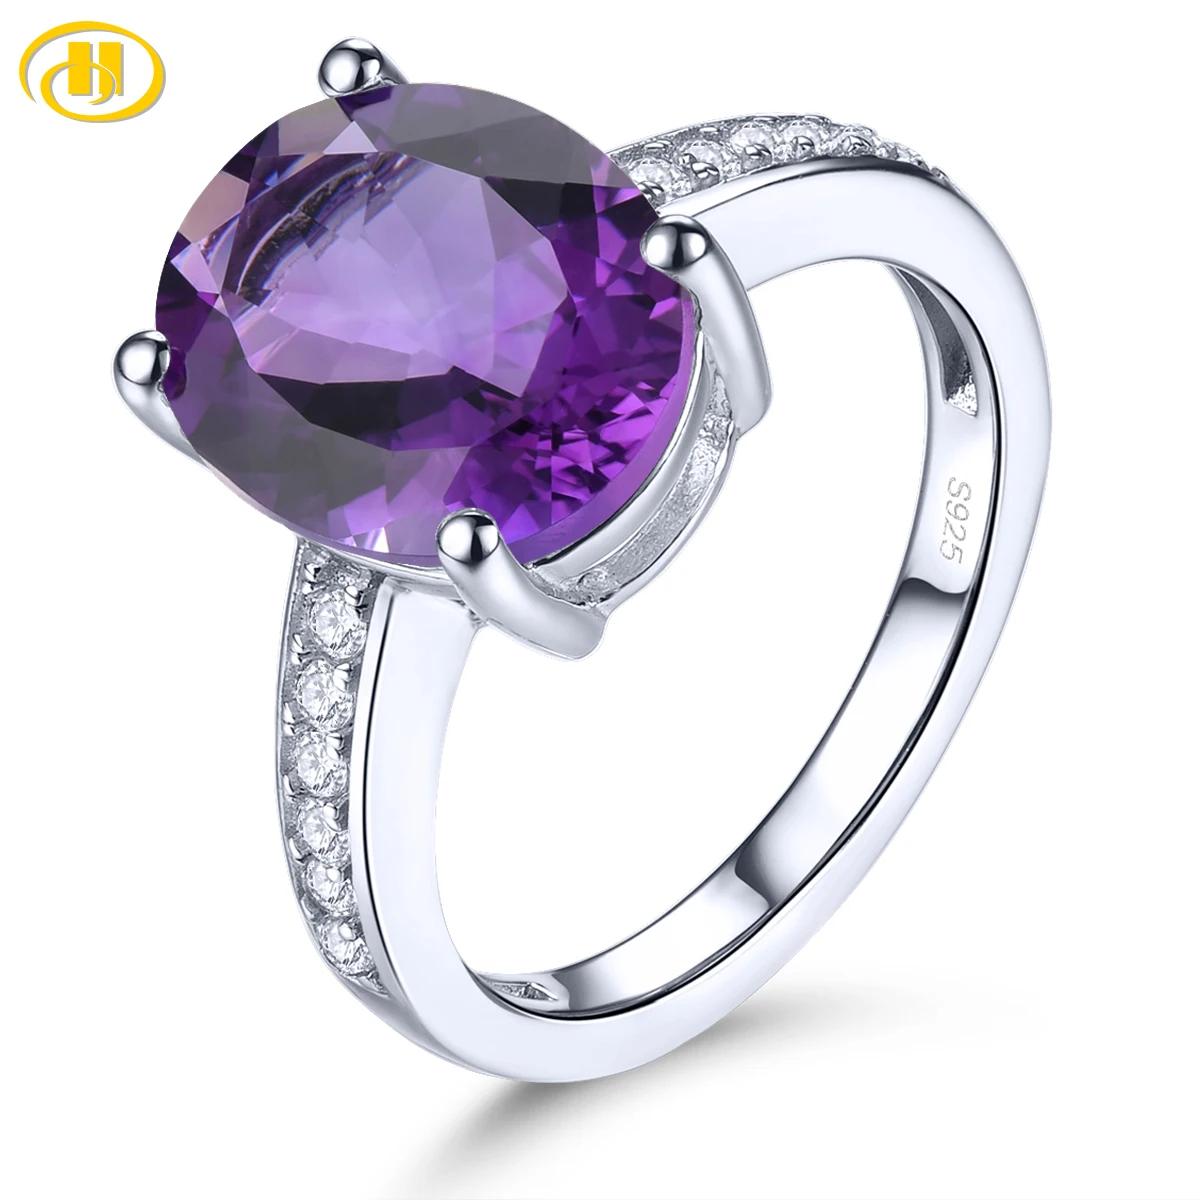 

Natural Amethyst 925 Sterling Silver Ring 4.1 Carats Genuine Gemstone Classic Style Fine Jewelry for Anniversary Gift